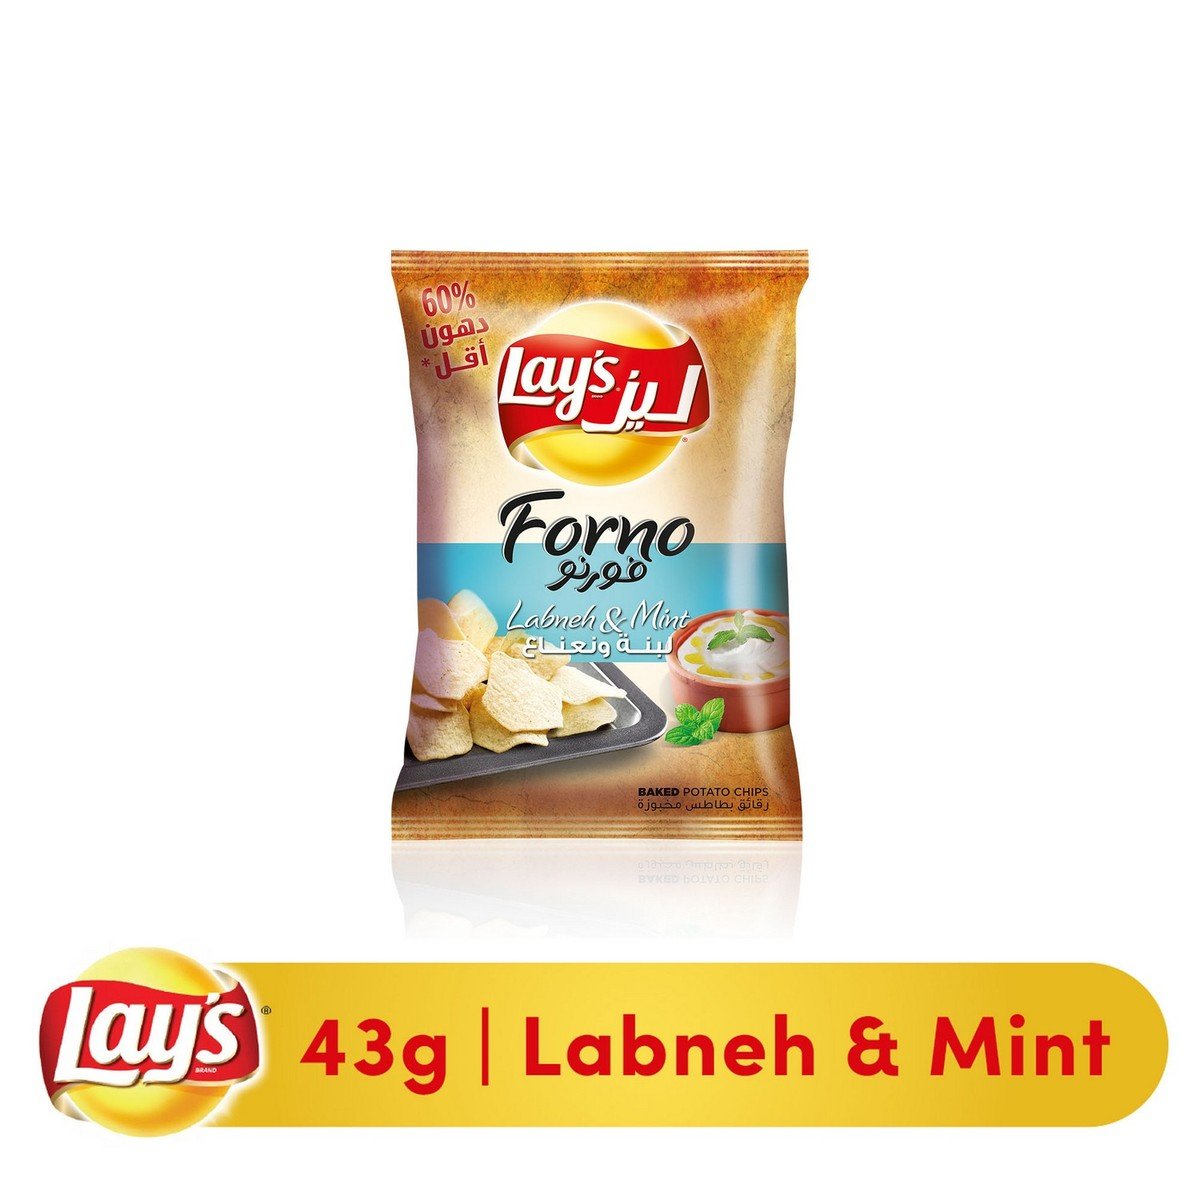 Lay's Forno Labneh Mint Potato Chips 43g